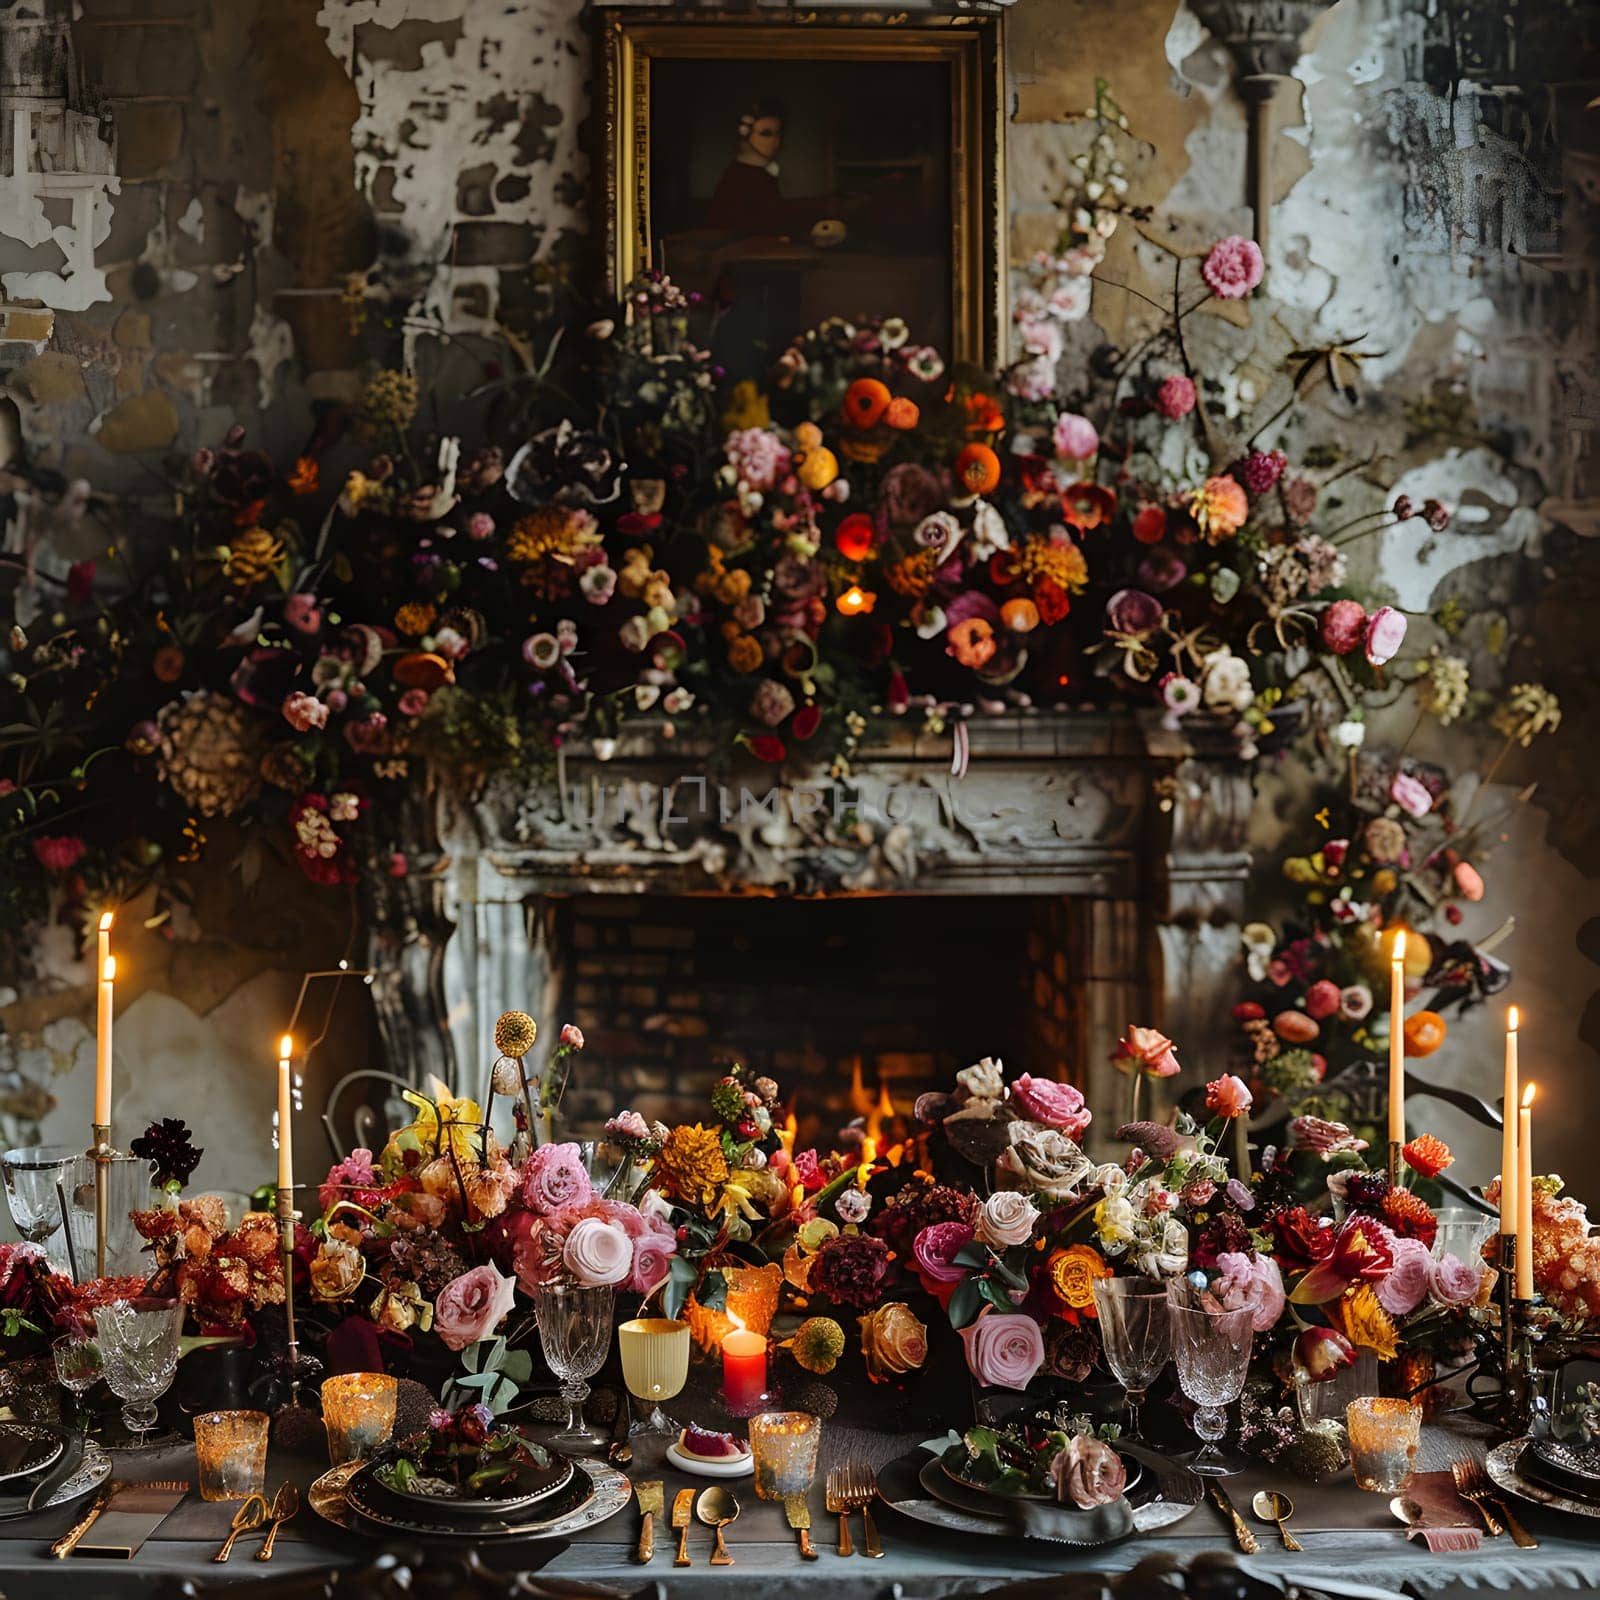 A festive table set with candles, flowers, and plates in front of a fireplace by Nadtochiy